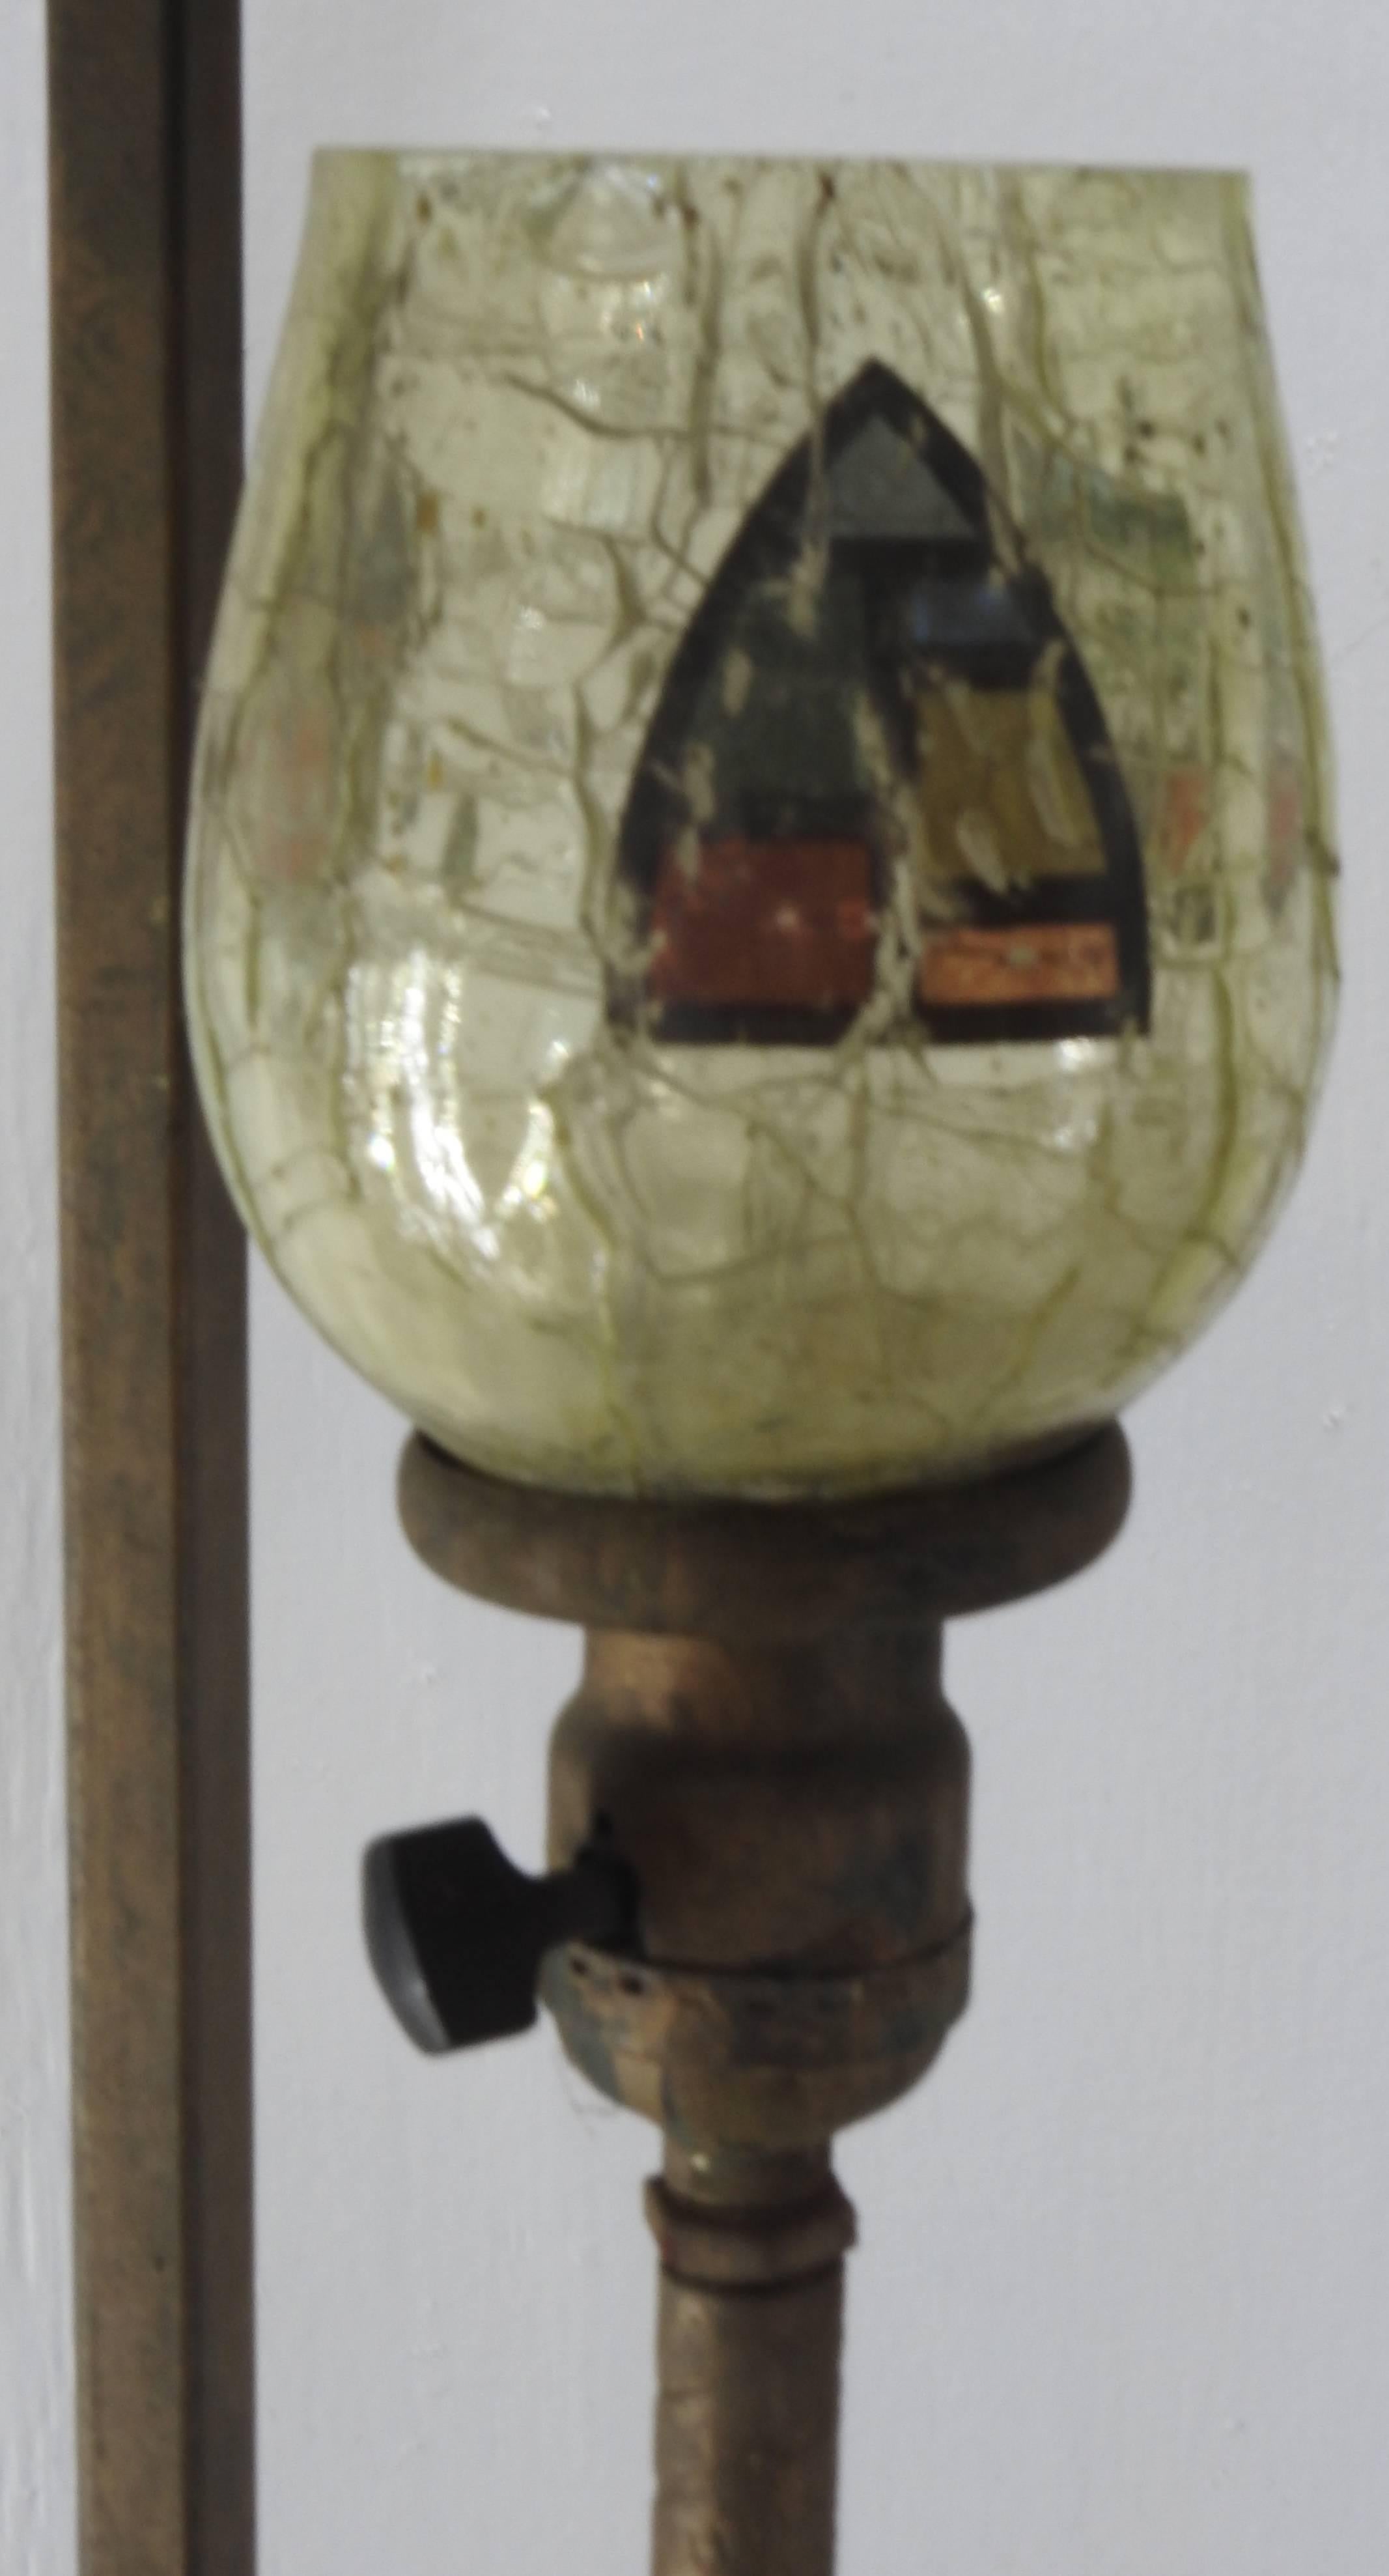 We are offering a unique lamp consisting of four arrows pointing upward. They surround a soft green crackle glass lampshade with a hand painted crest. The base is marked 